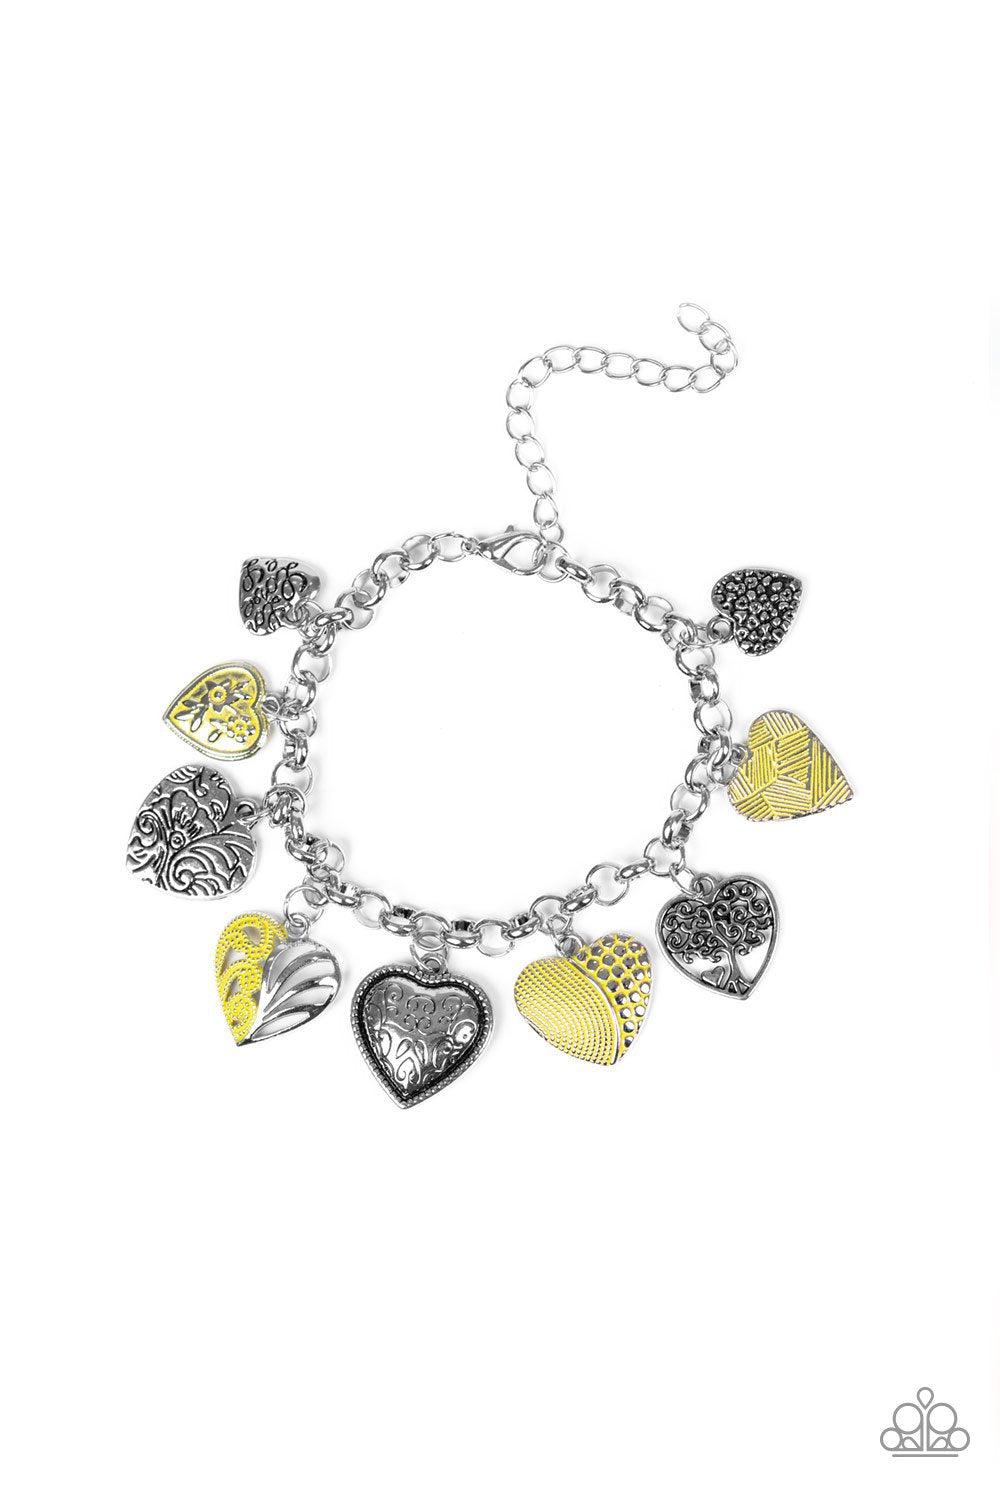 Garden Hearts Silver and Yellow Bracelet - Paparazzi Accessories-CarasShop.com - $5 Jewelry by Cara Jewels